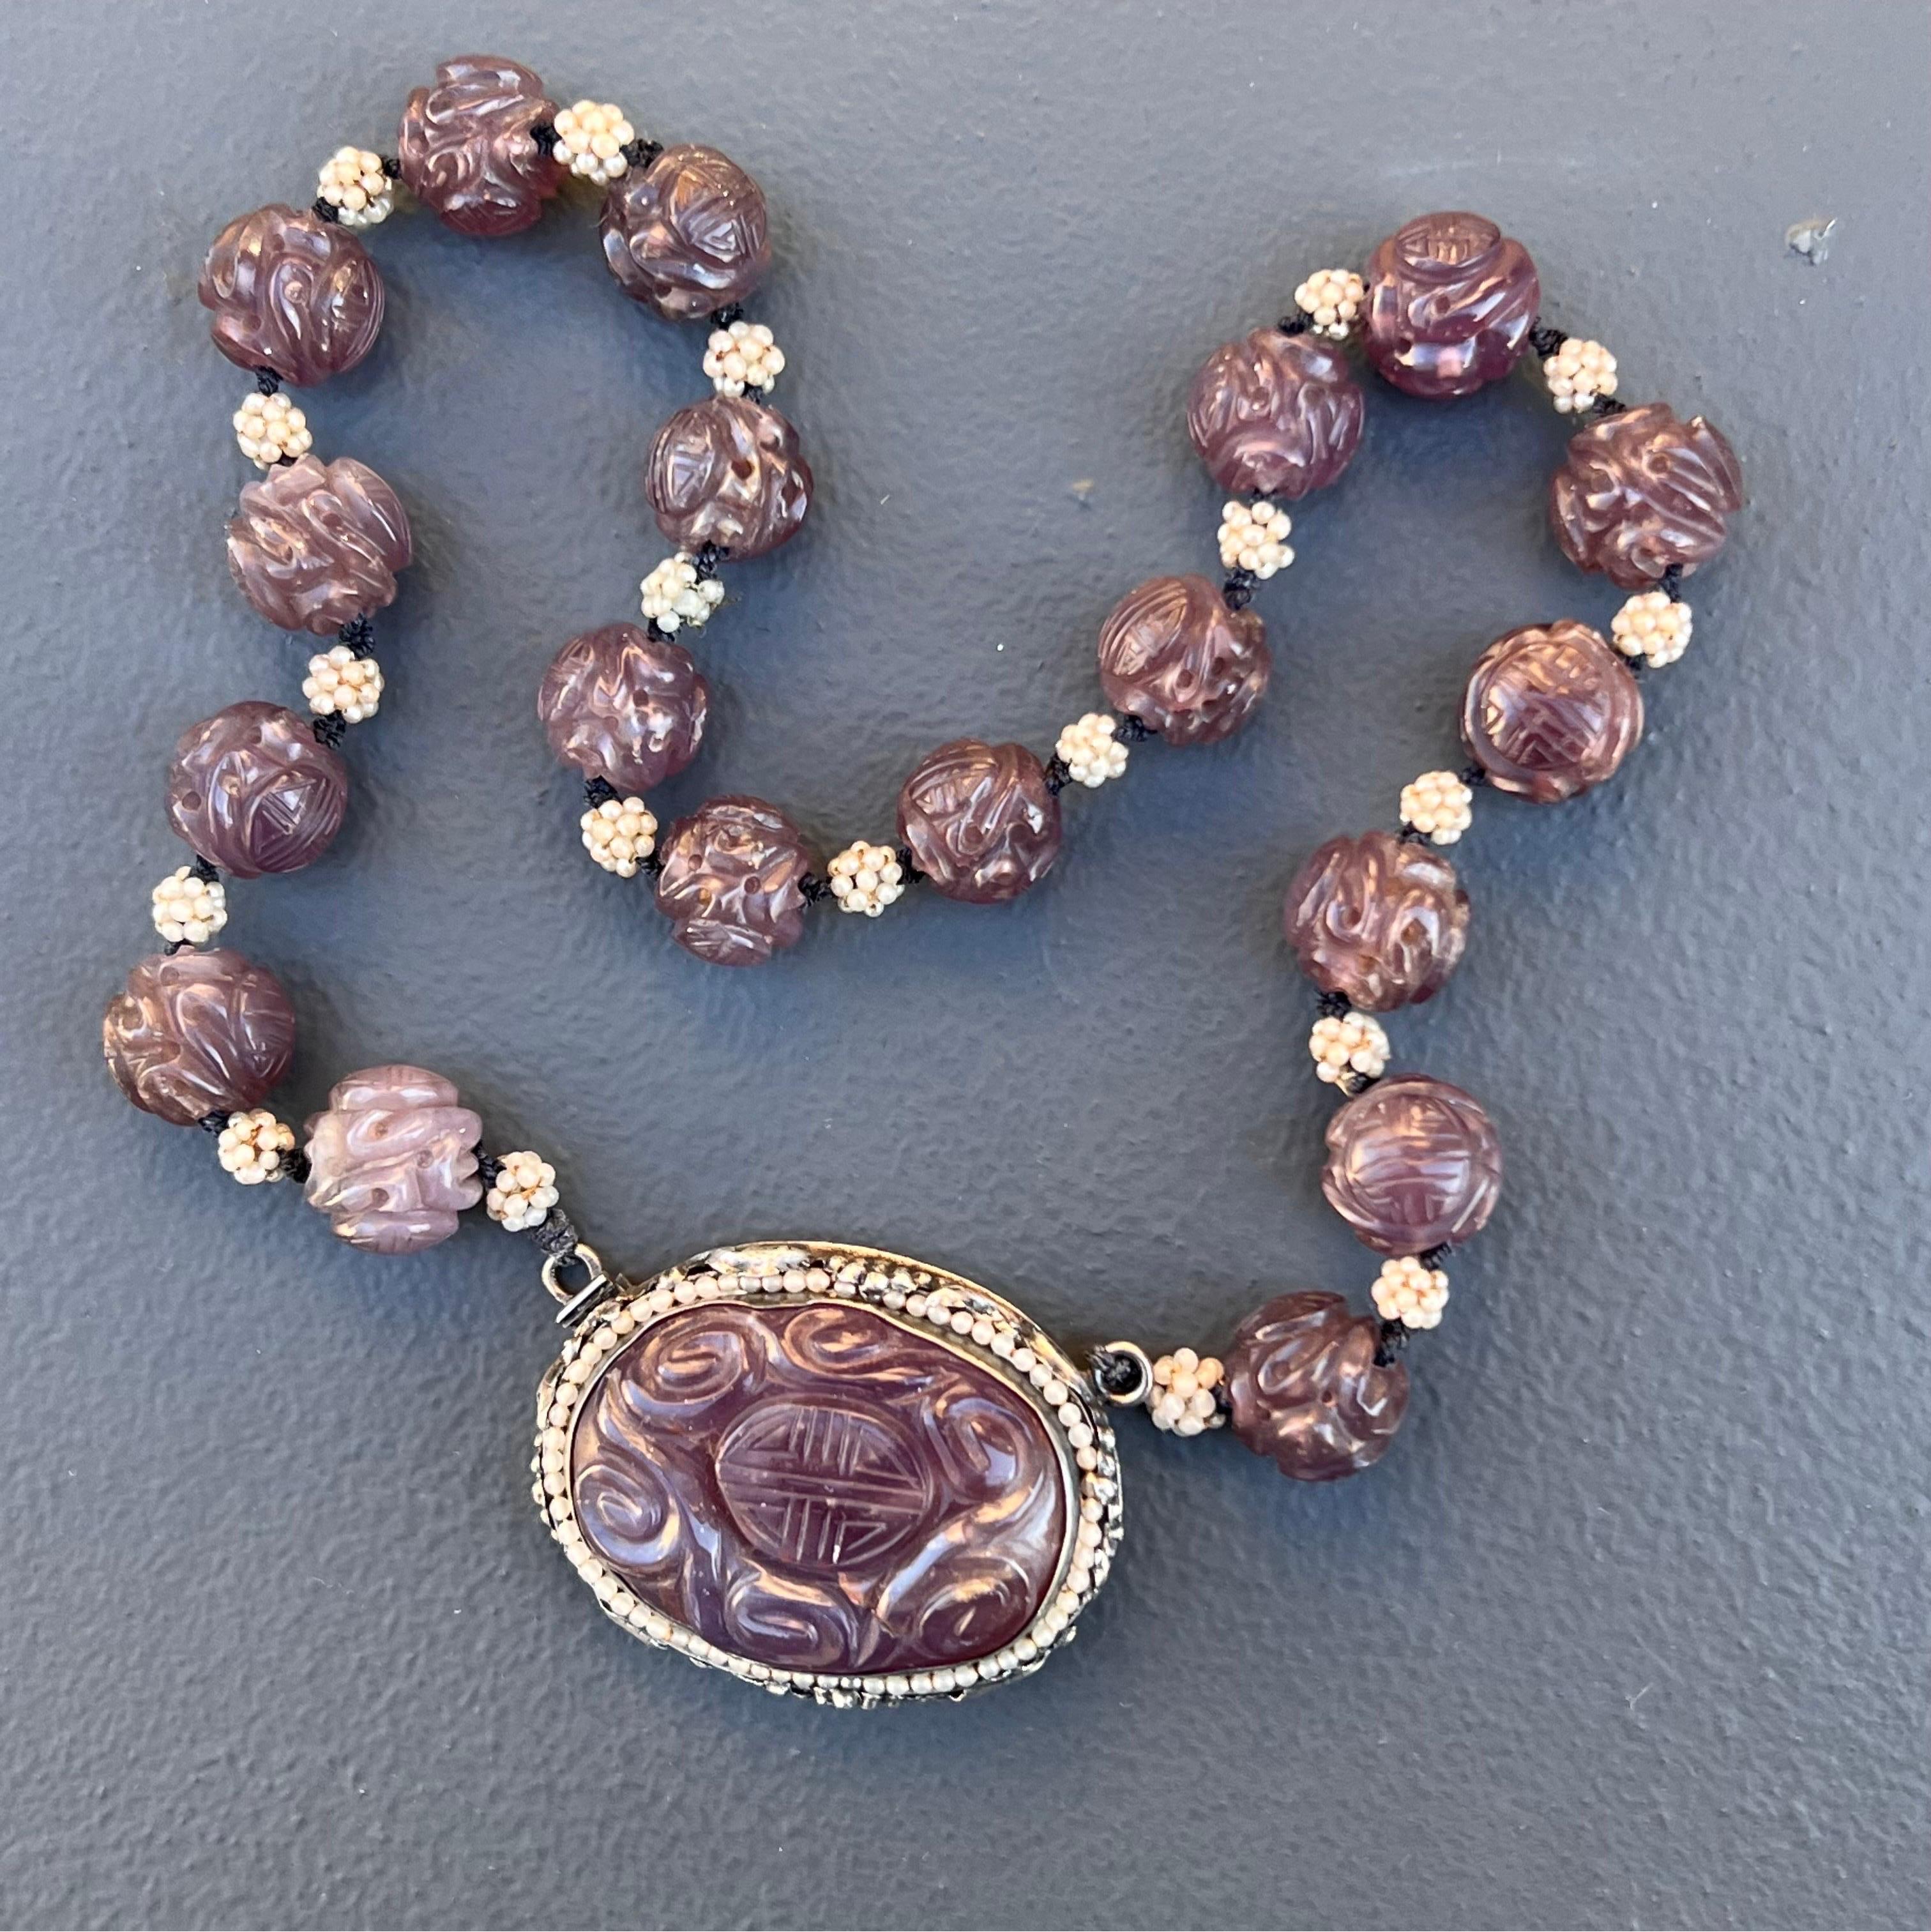 Antique handmade  Art Deco Chinese export  necklace with carved Shou amethyst beads with a large very ornate sterling silver clasp . Clasp /central pendant has deeply carved amethyst stone which is set on an very ornate frame featuring different